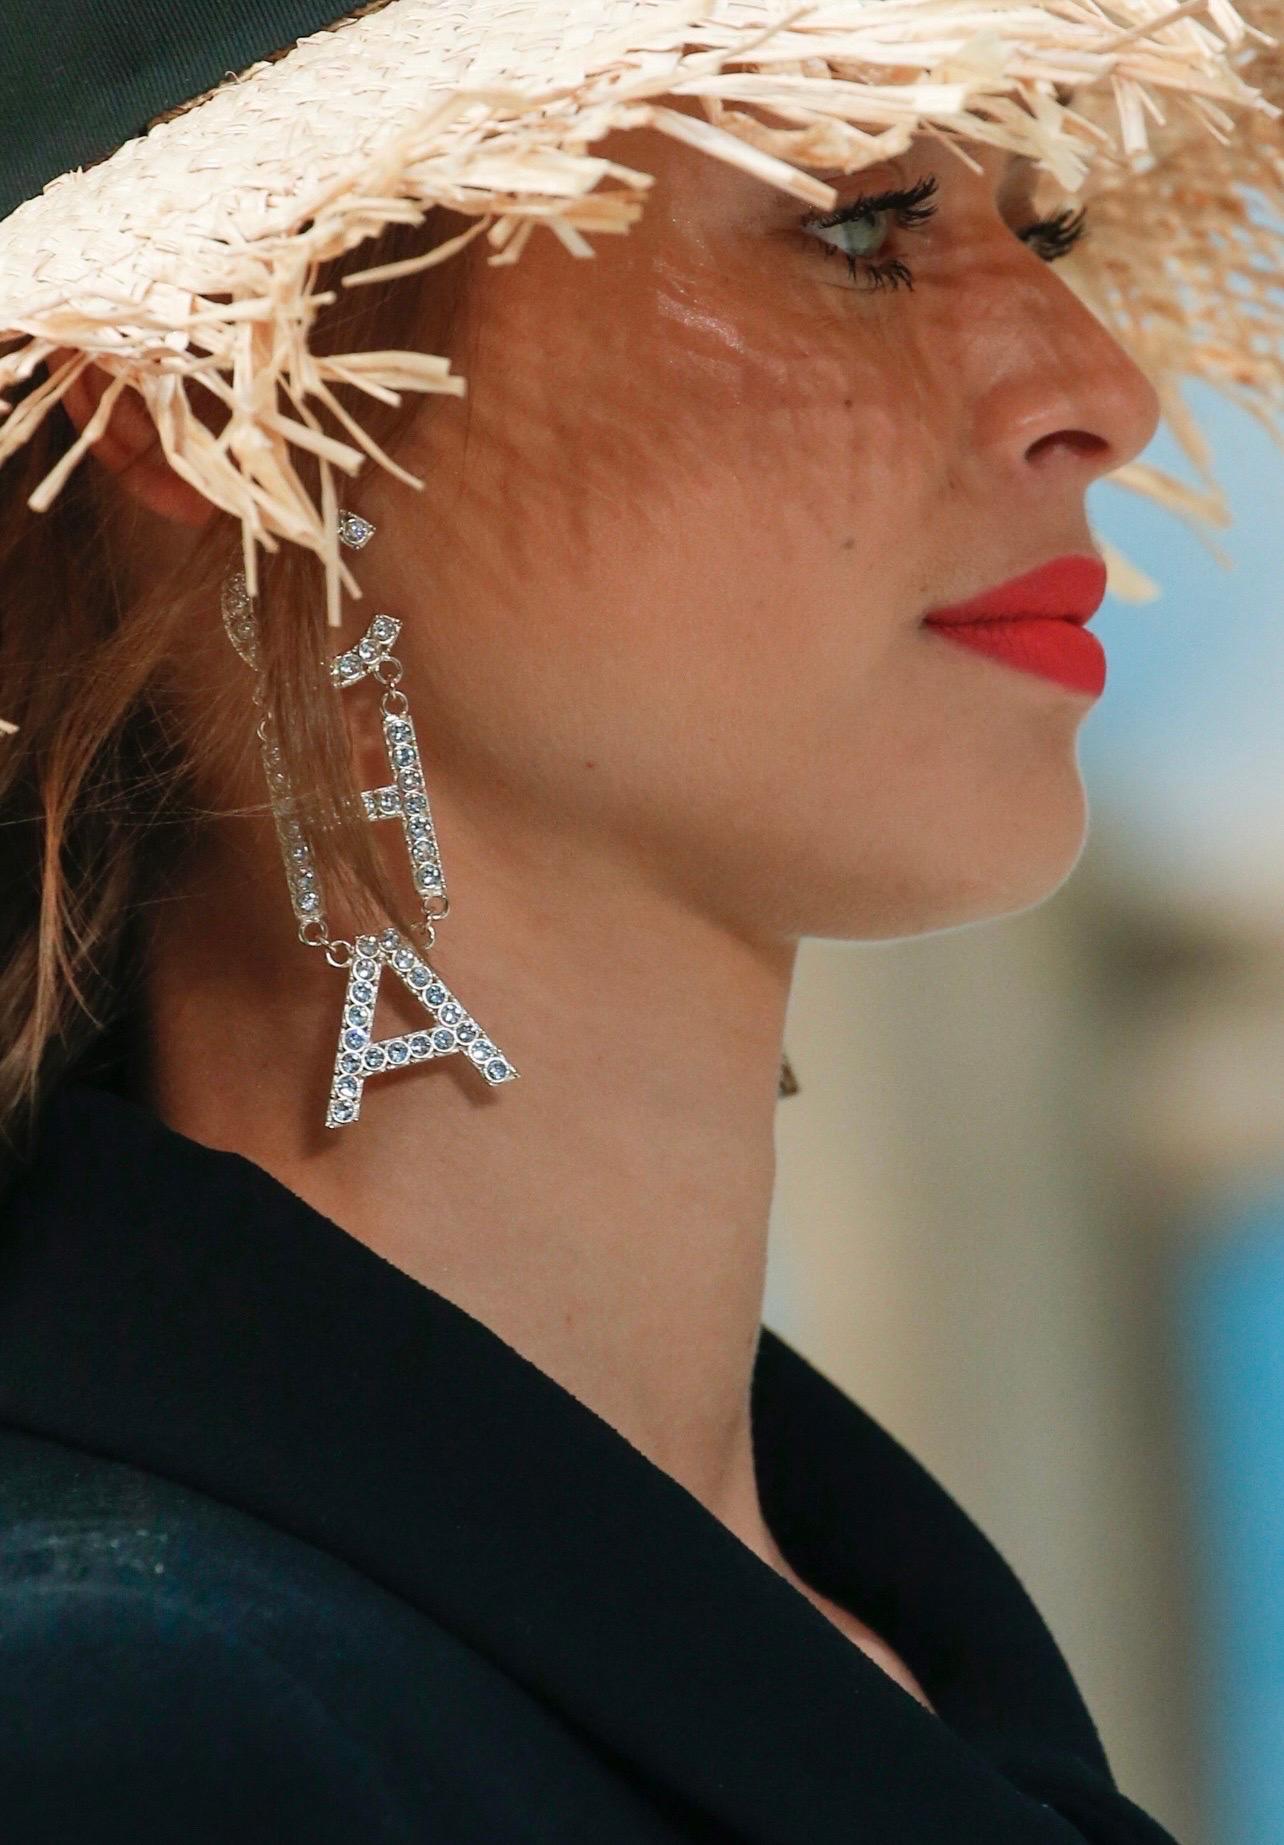 Snag a piece of Chanel history! These will never go out of style. These iconic and over the top logo Spring 2019 Ready-to-Wear collection were worn by multiple models on the runway. There's no doubt this will be a staple in your jewelry collection!